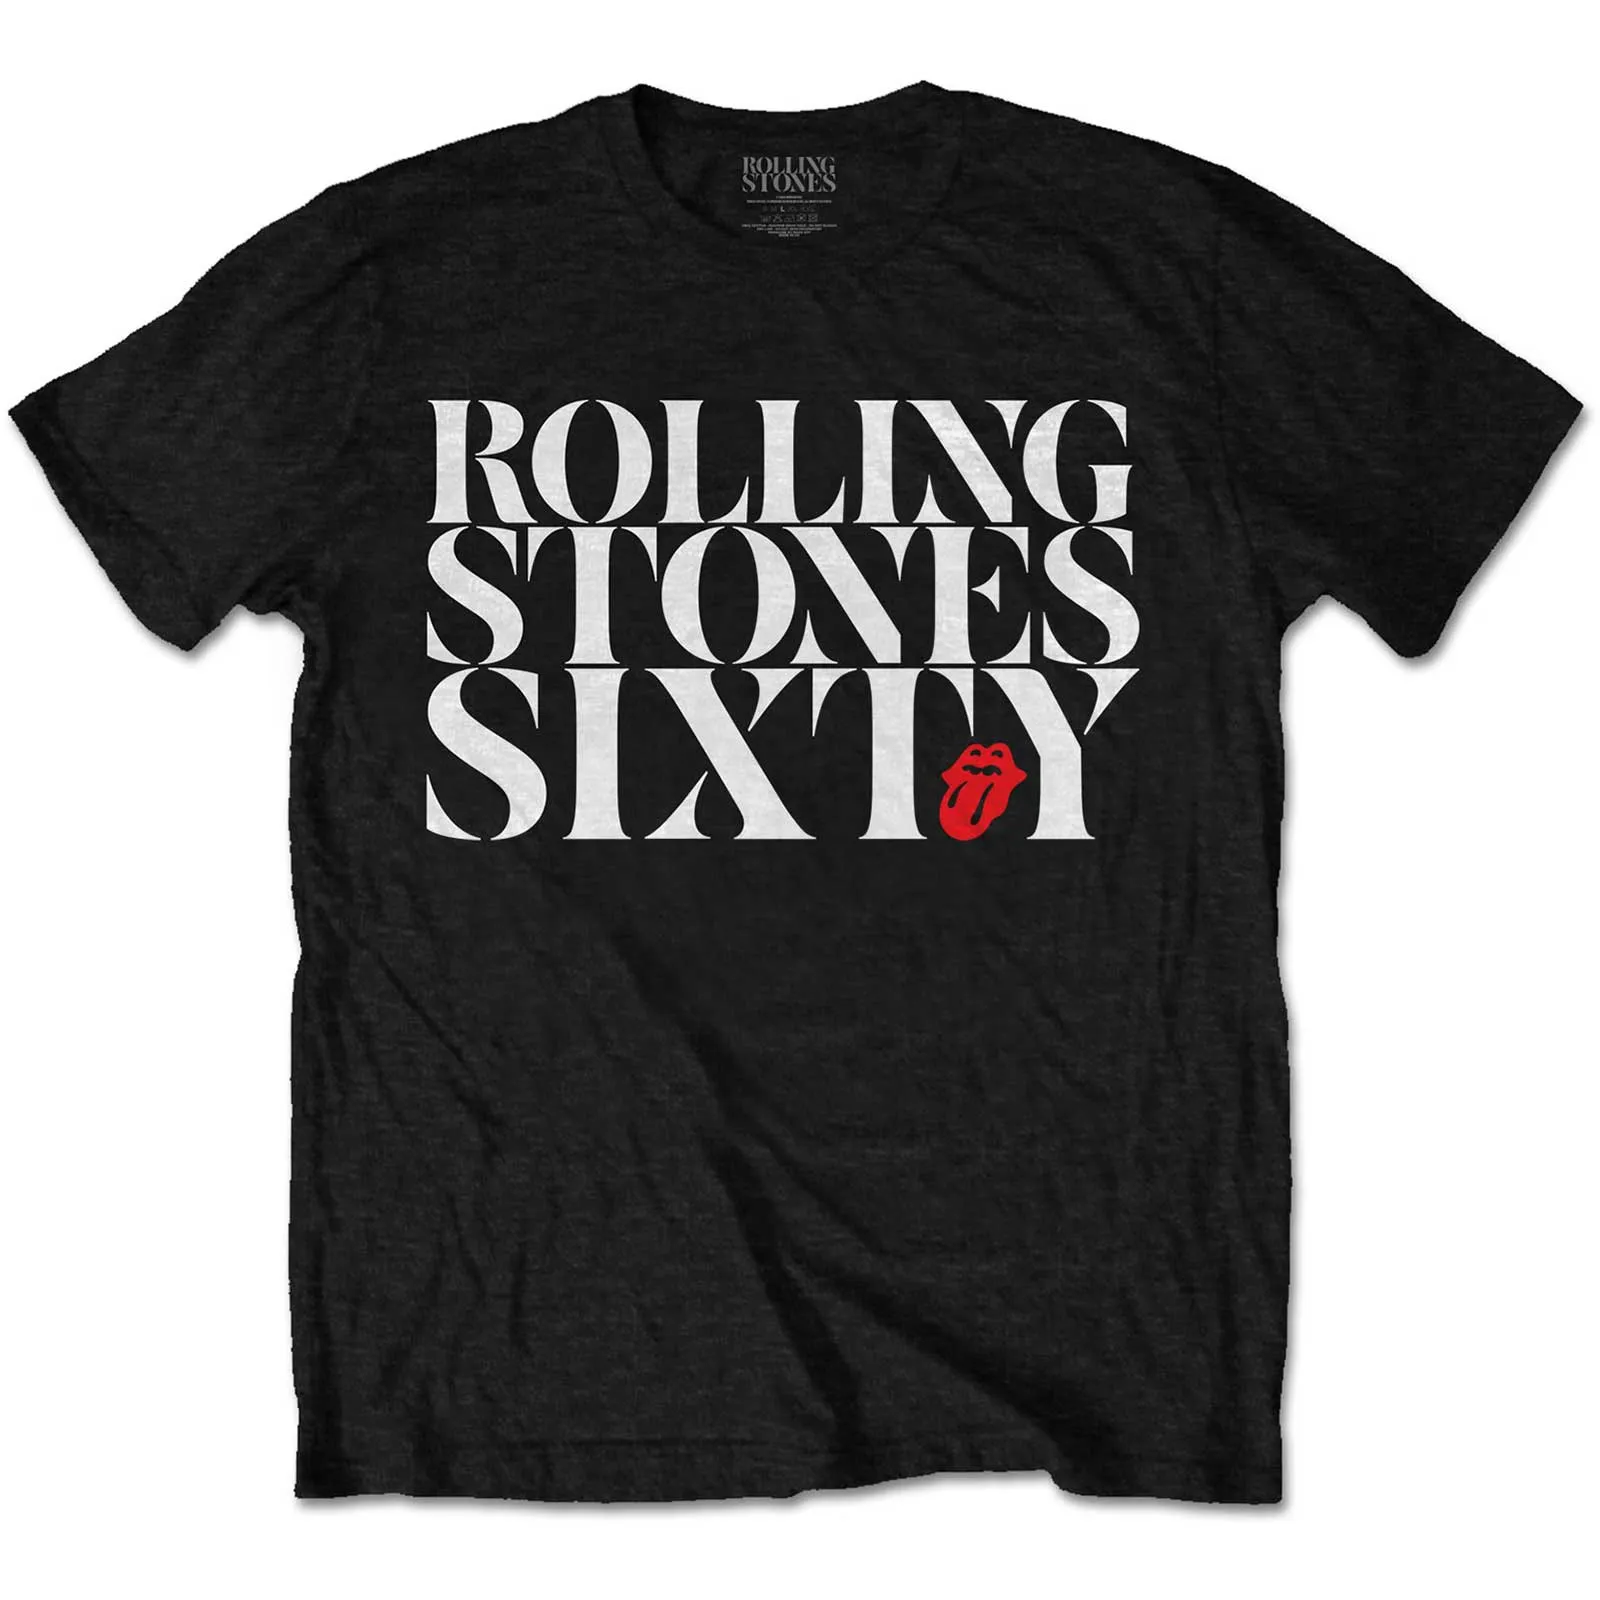 The Rolling Stones - Unisex T-Shirt Sixty Chic artwork